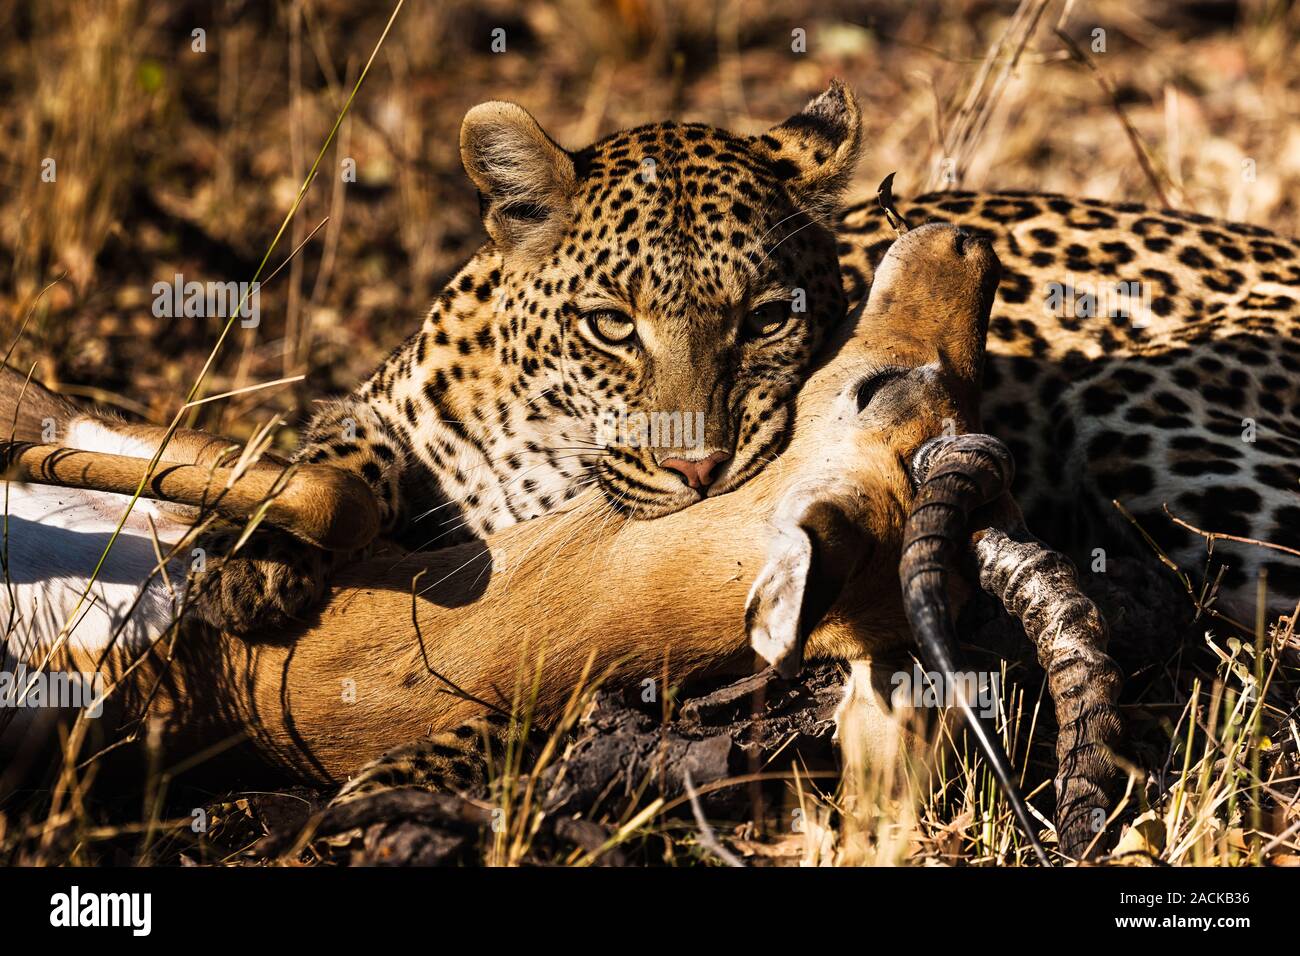 Leopard is hunting Impala, Impala is still alive, at morning forest, in Moremi Game Reserve, Okavango Delta, Botswana, Africa Stock Photo